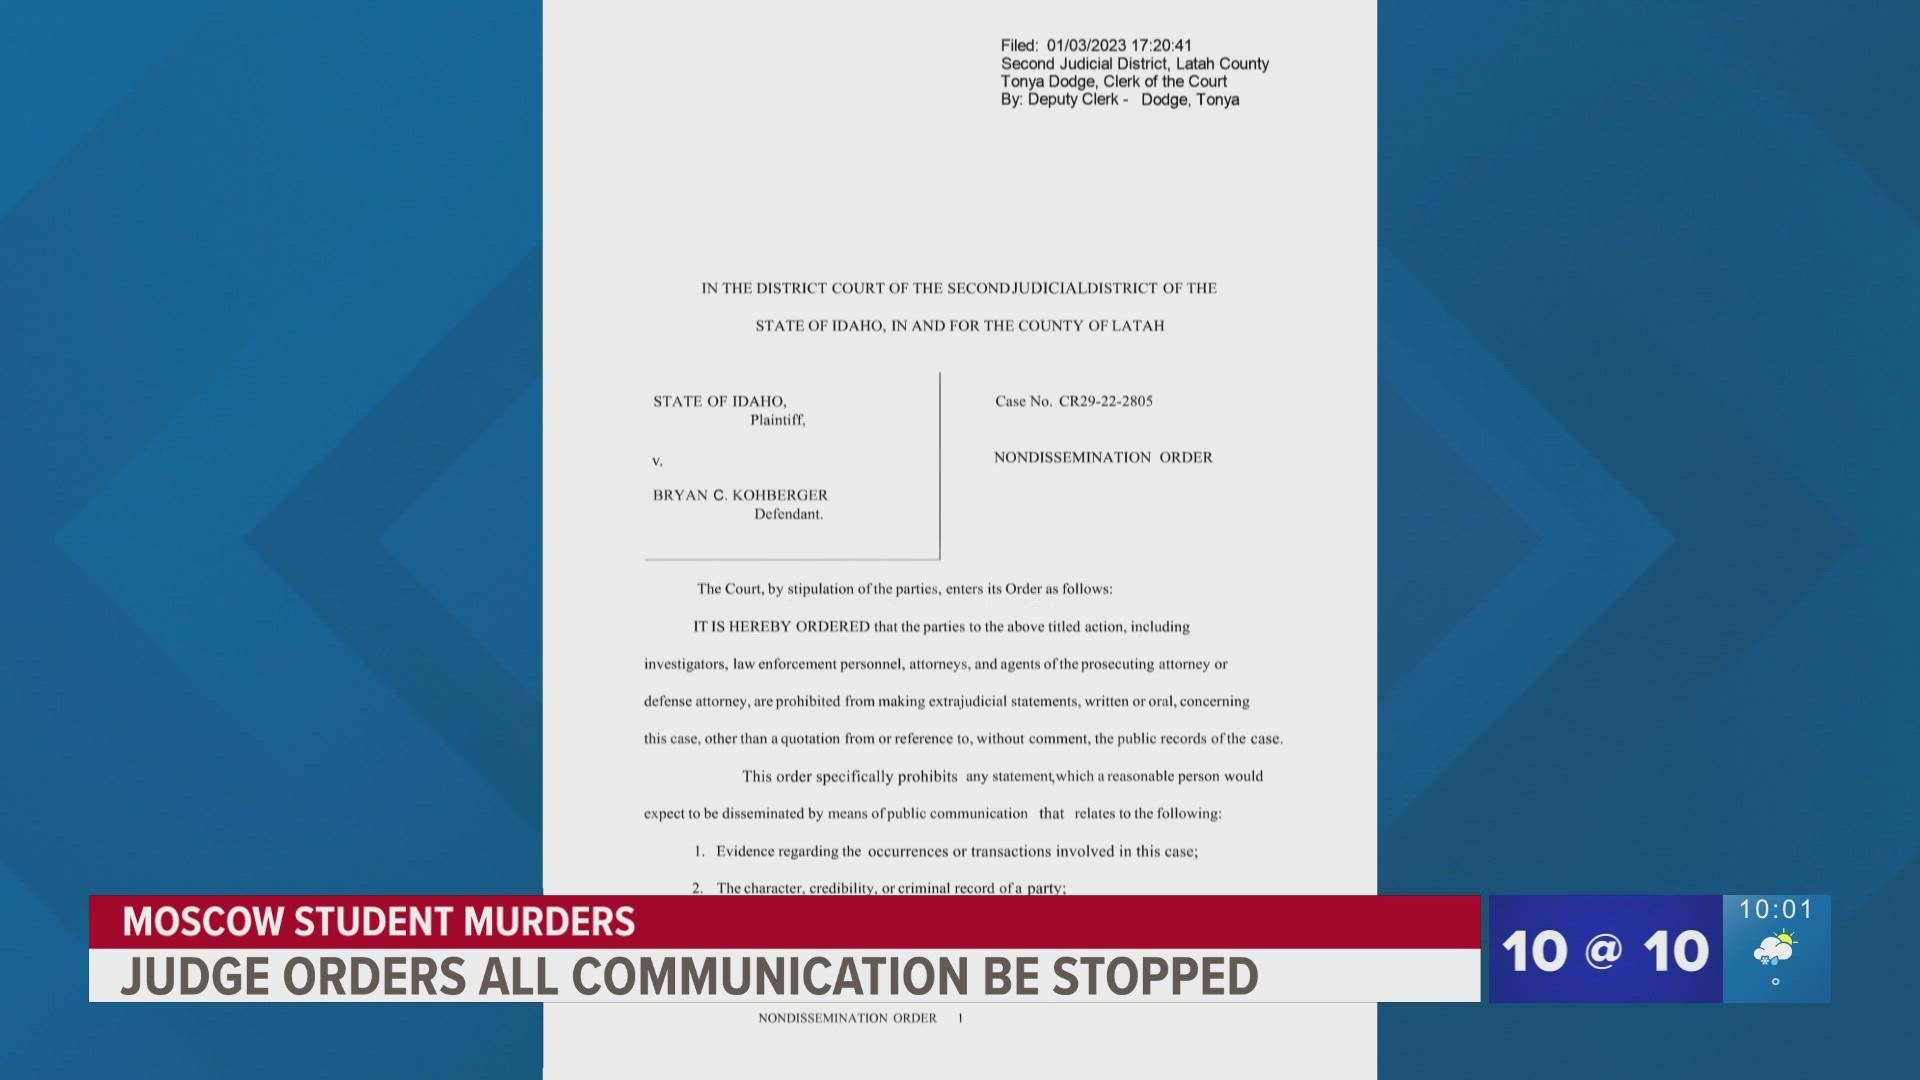 This means investigators, law enforcement personnel, attorneys and agents of both attorneys can no longer communicate to the public and media on the case.